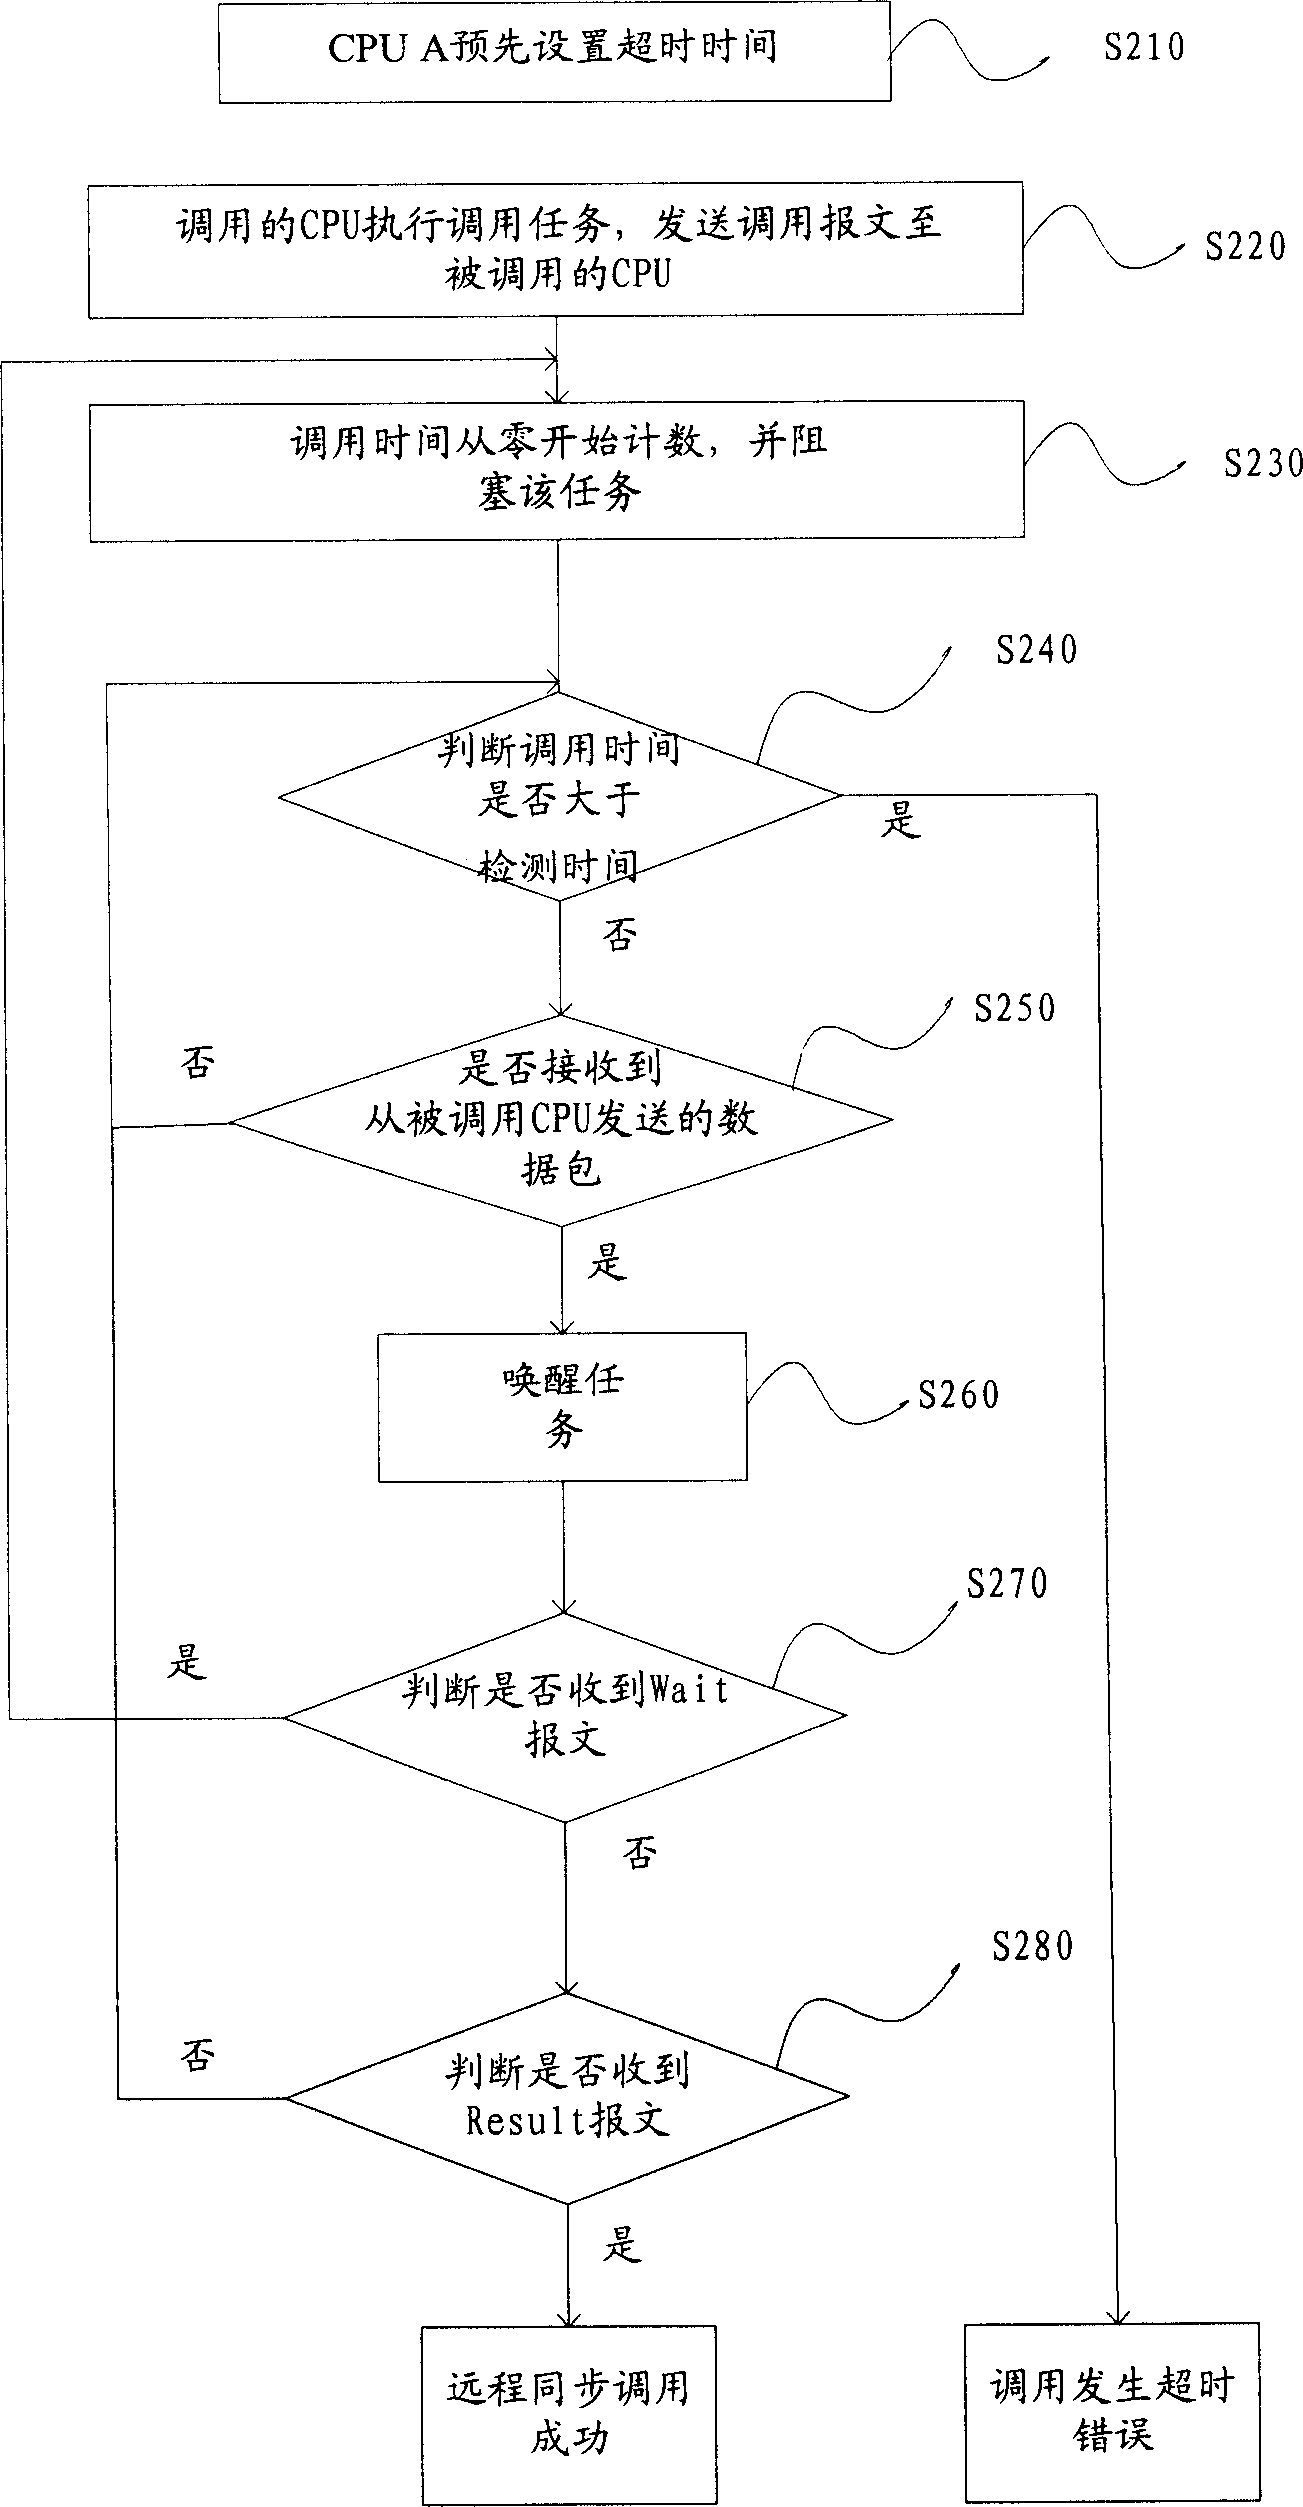 Time-out adaptive method in remote synchronous calling procedure